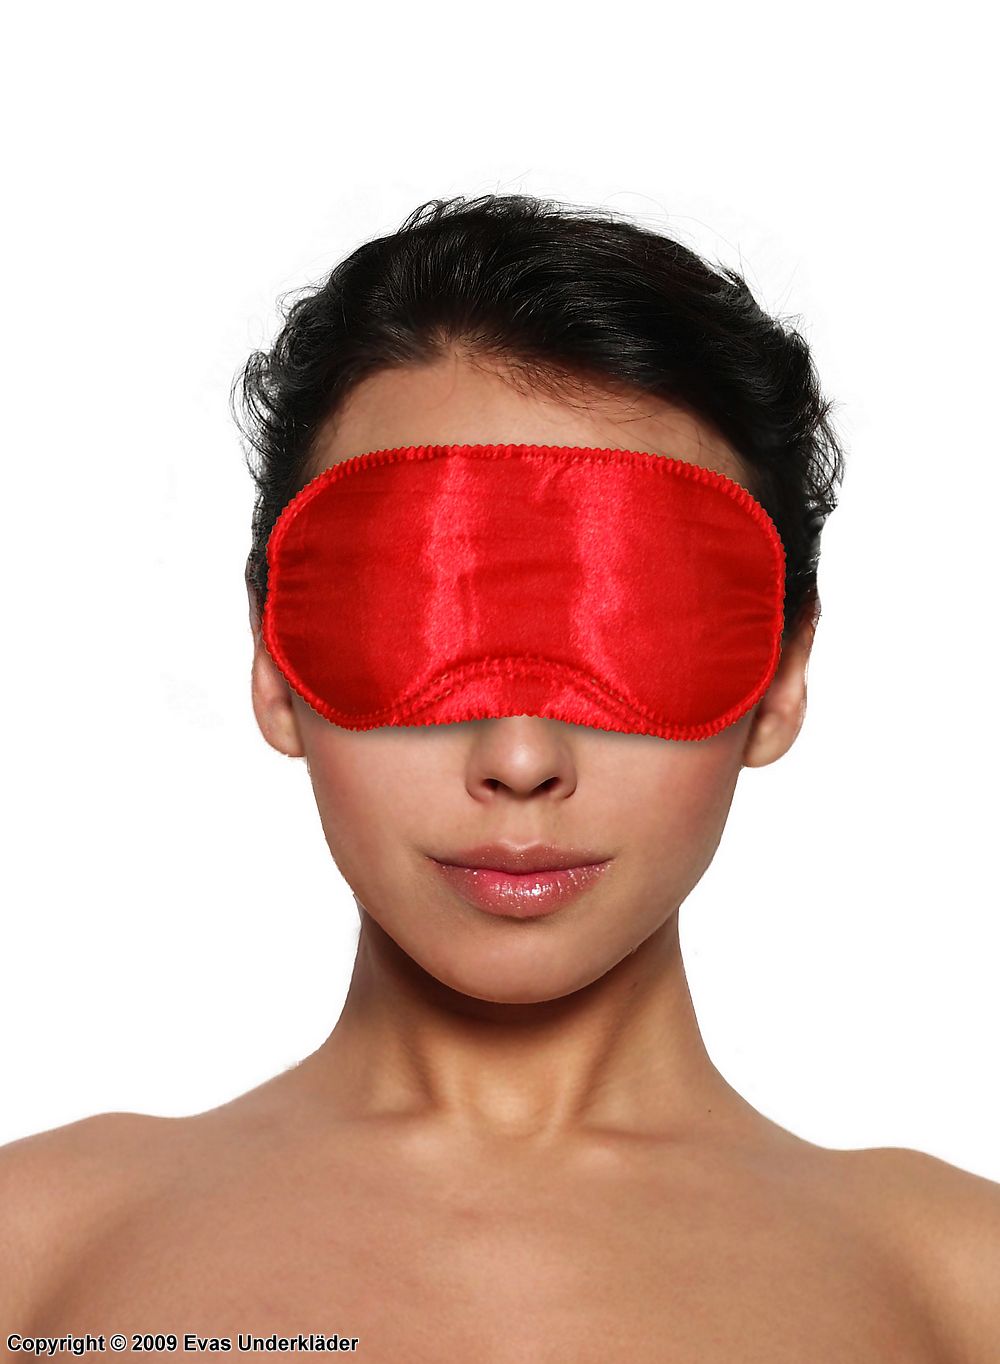 Sleep mask in red